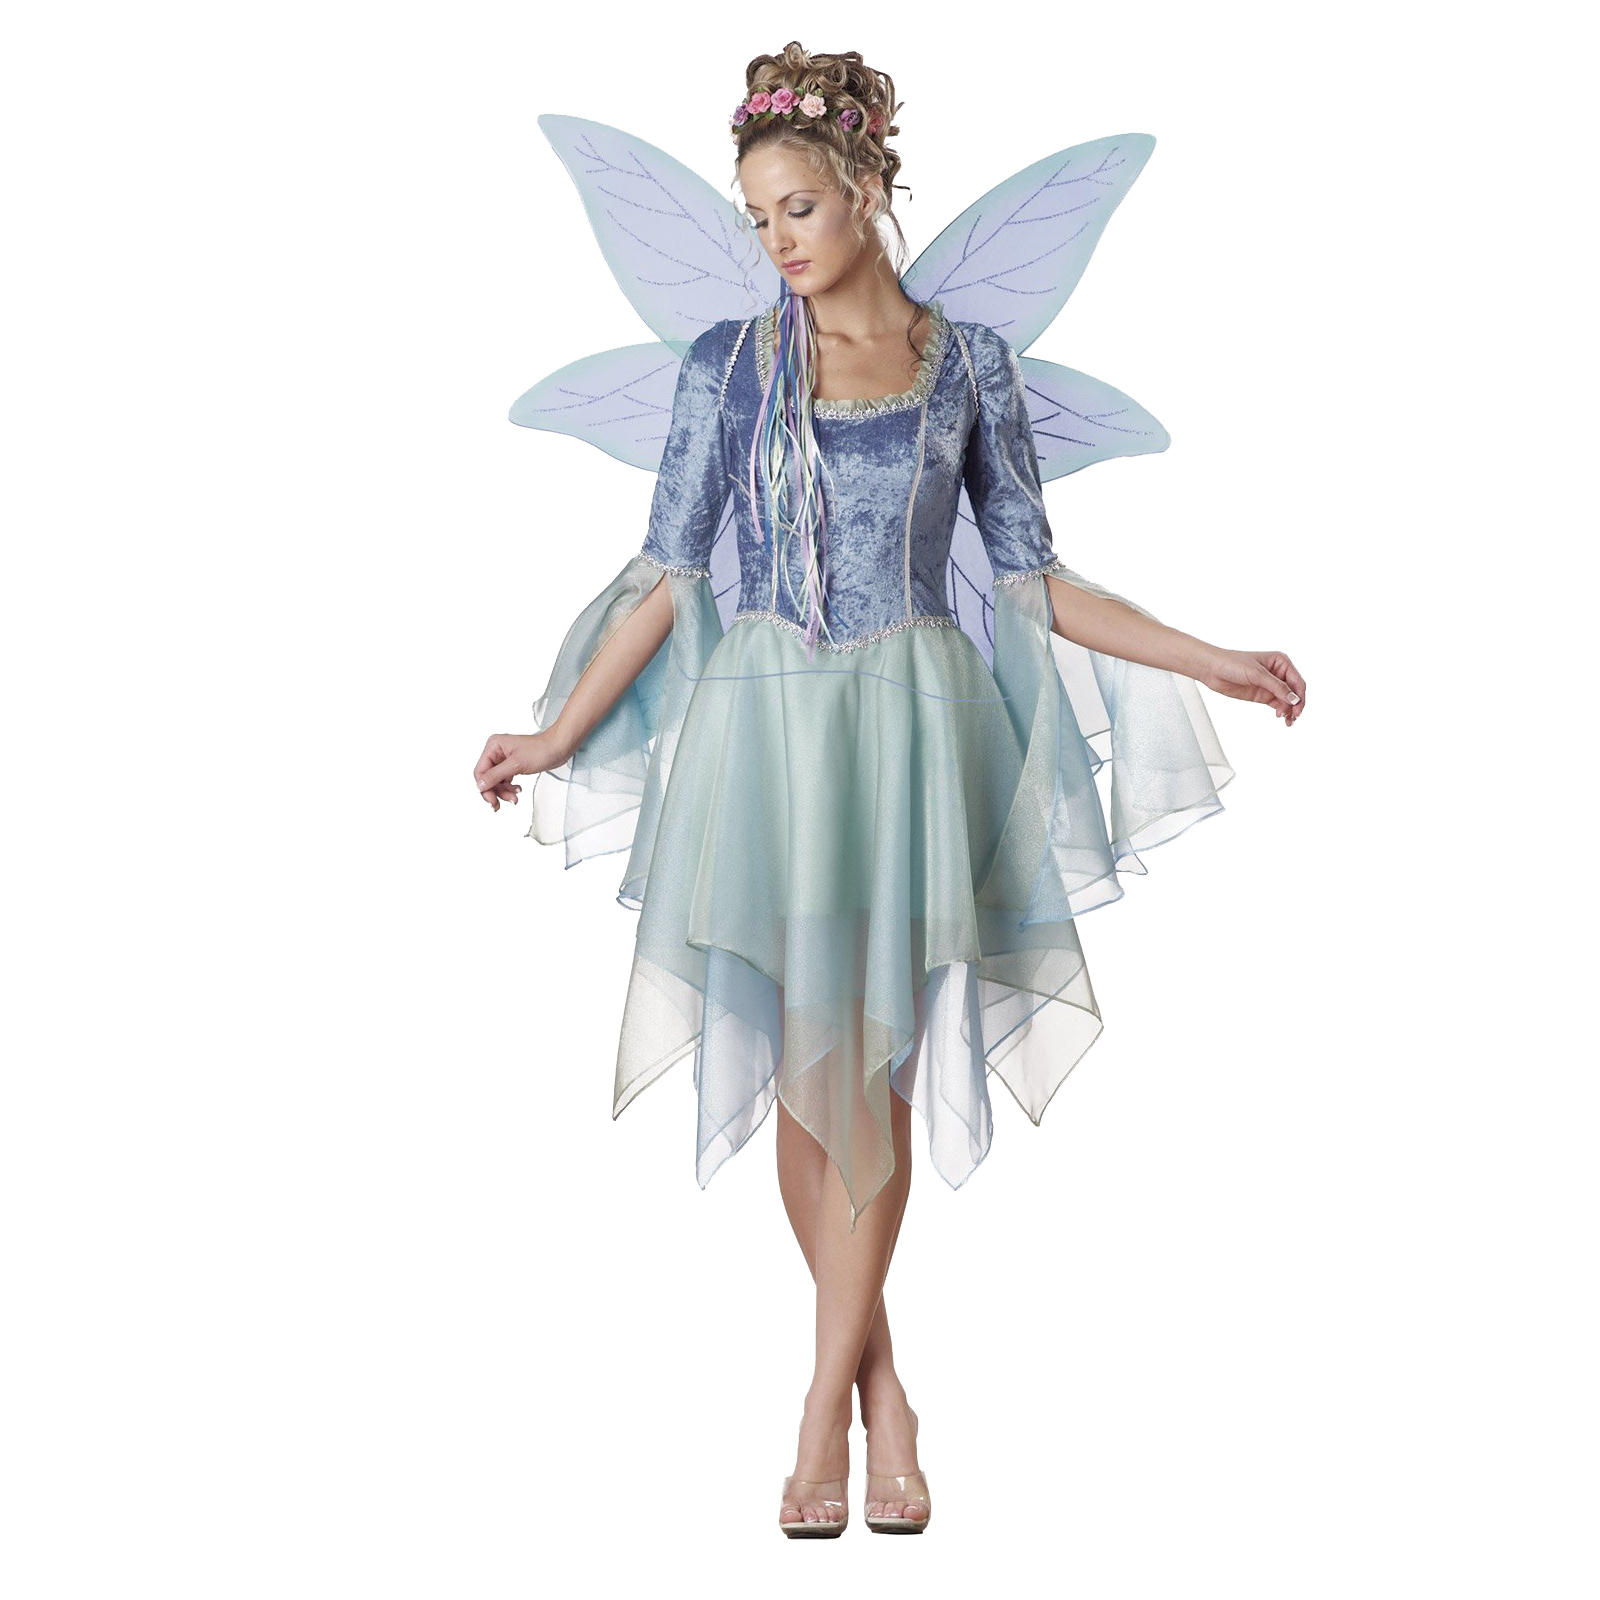 Naughty Nymph Elite Collection Fairy Tale Tinkerbell Adult Halloween Costume 